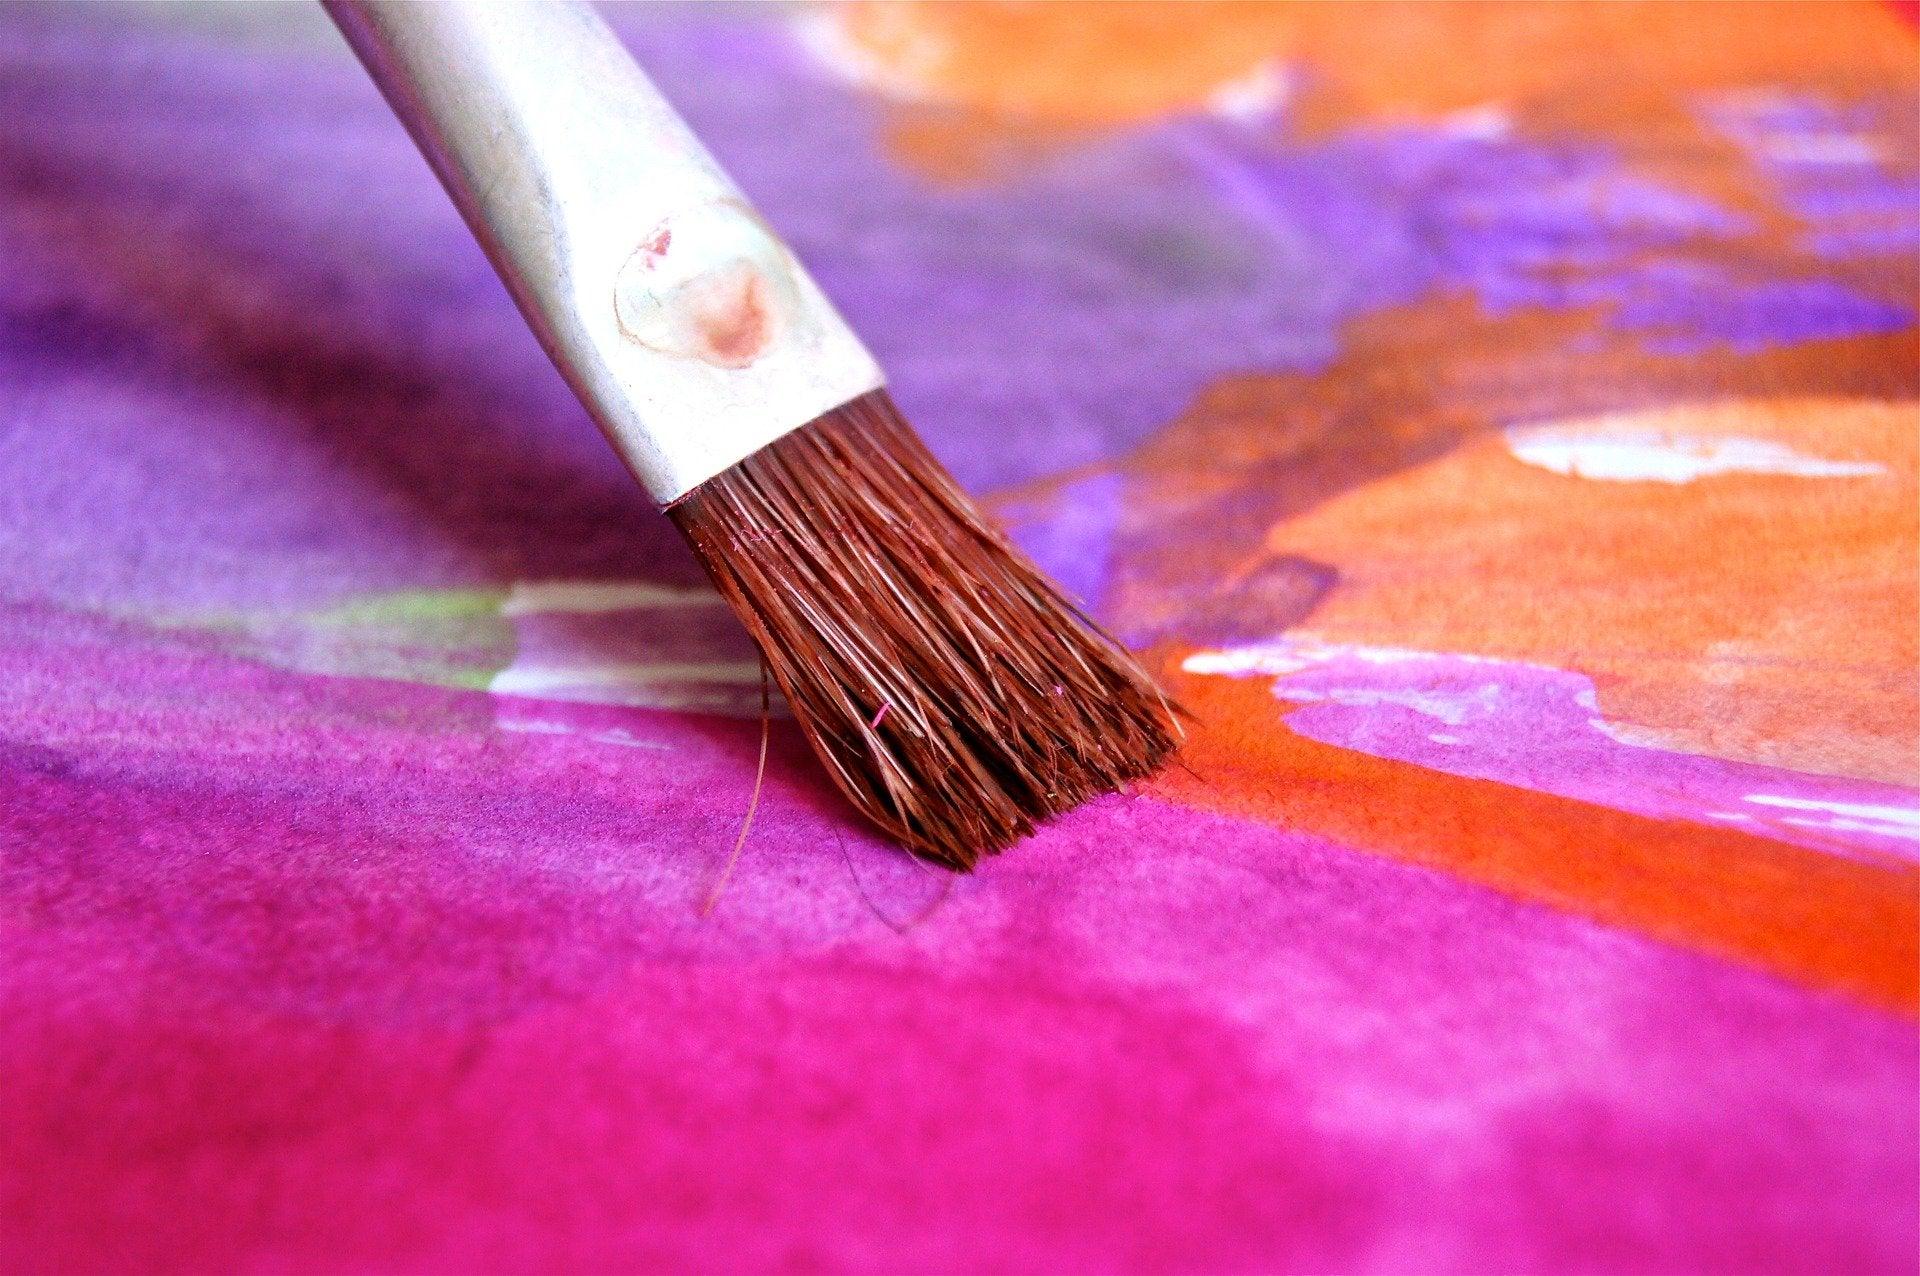 Paint brushes by Art Studio